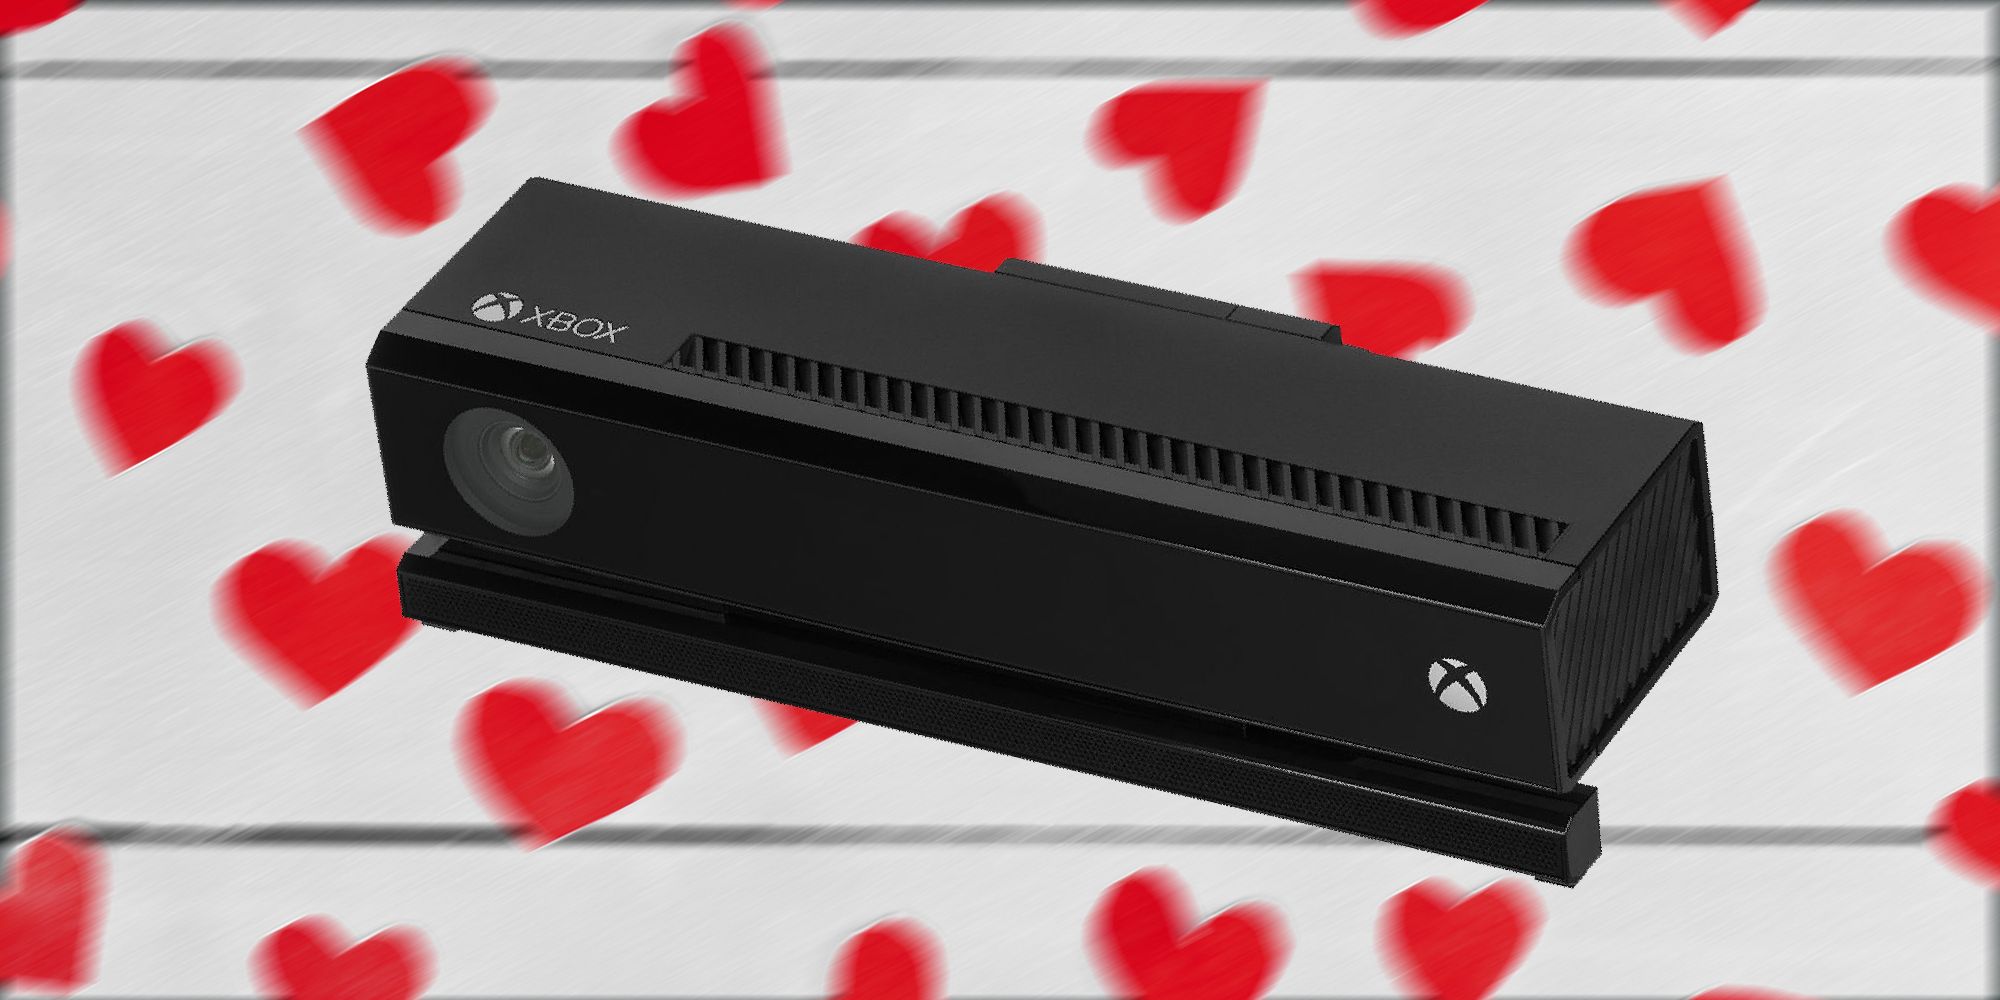 Remembering The Life And Times Of The Xbox Kinect